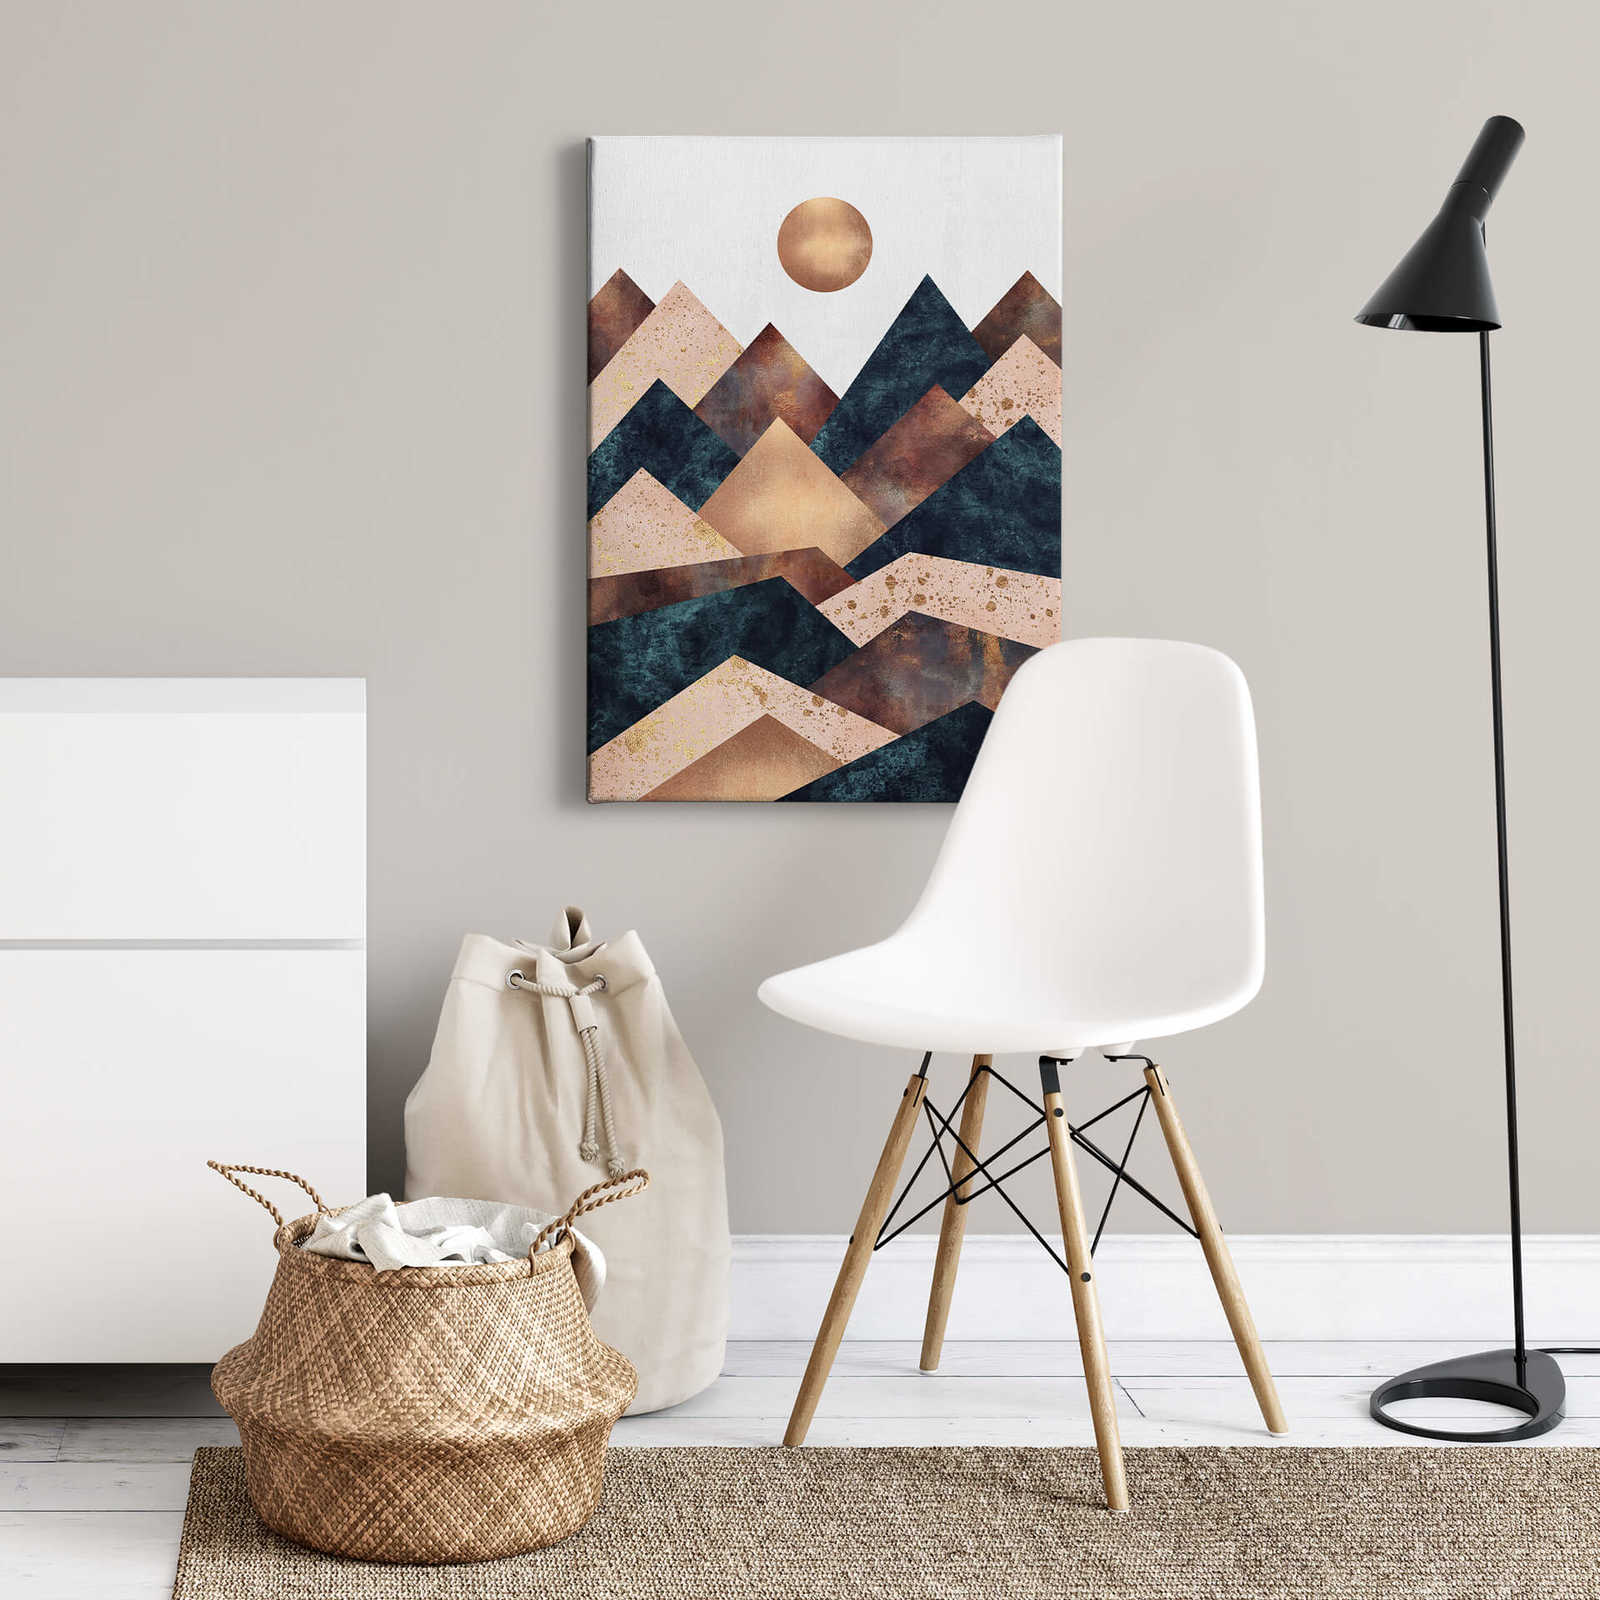             Canvas print "Autumn day in the mountains" by Fredriksson
        